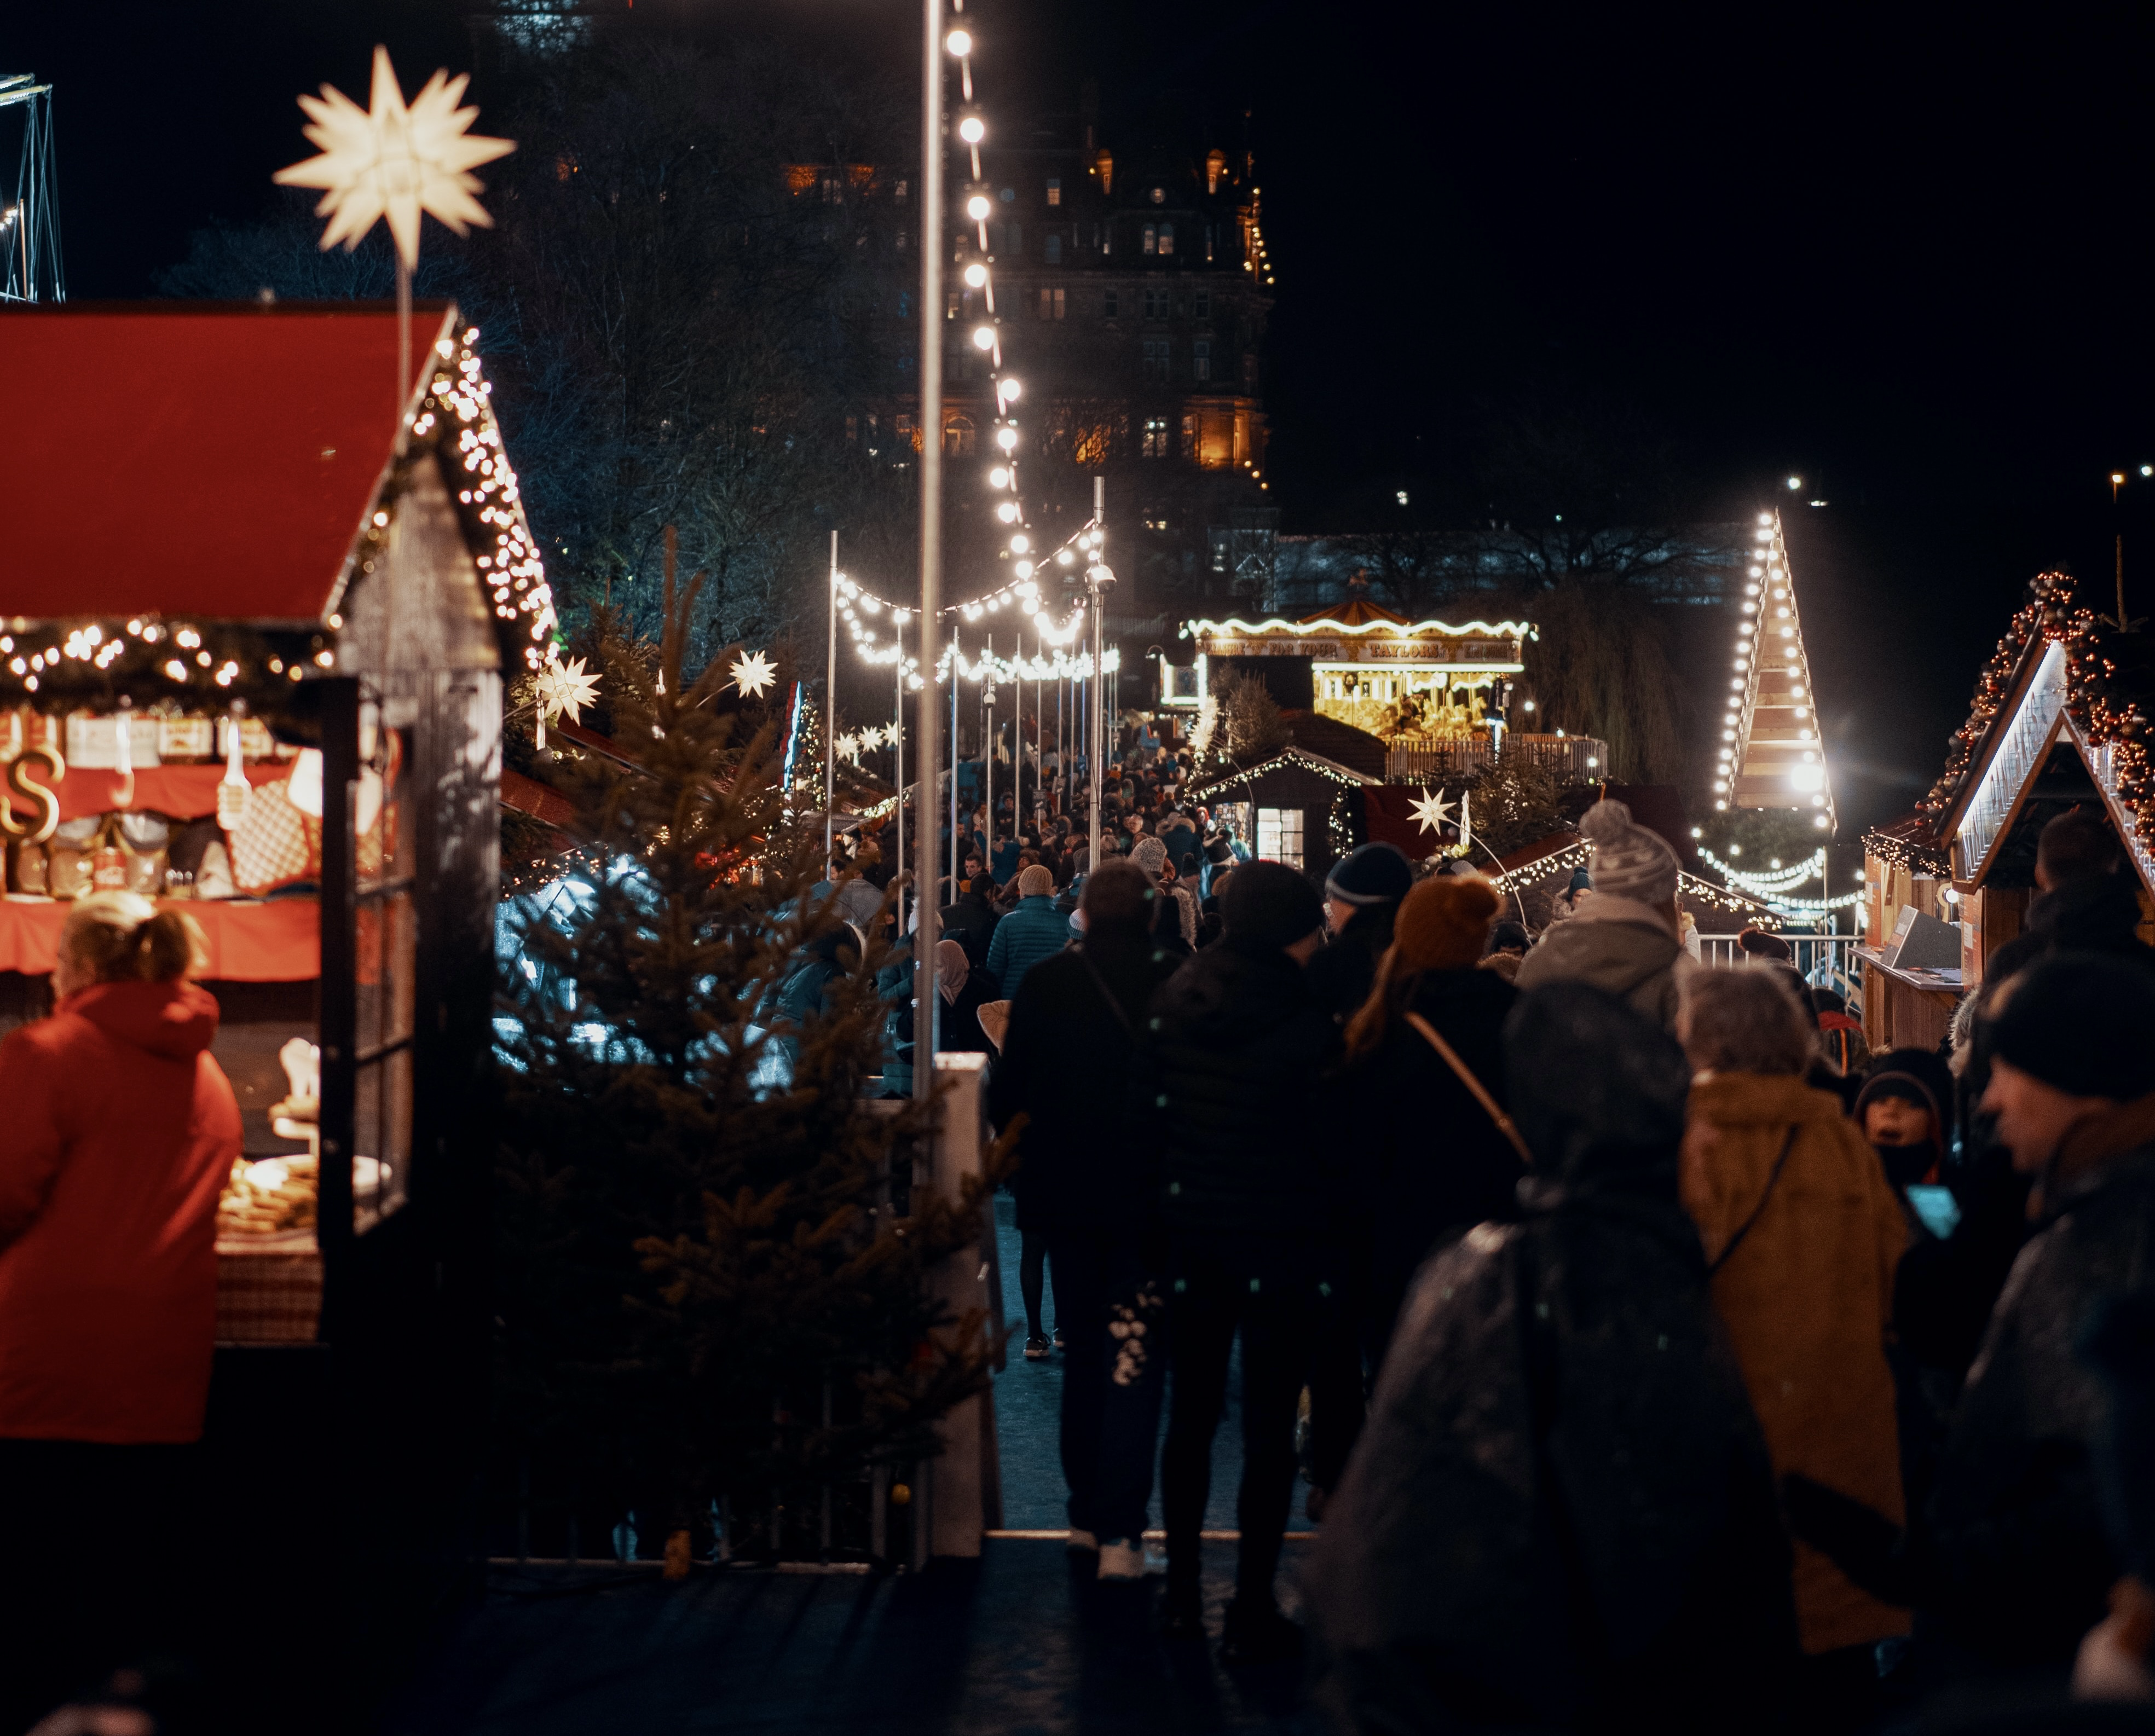 Scotland has Christmas markets that visitors will not want to miss. 
Pictured: a Christmas market in Scotland at night with festive lights and a large crowd 